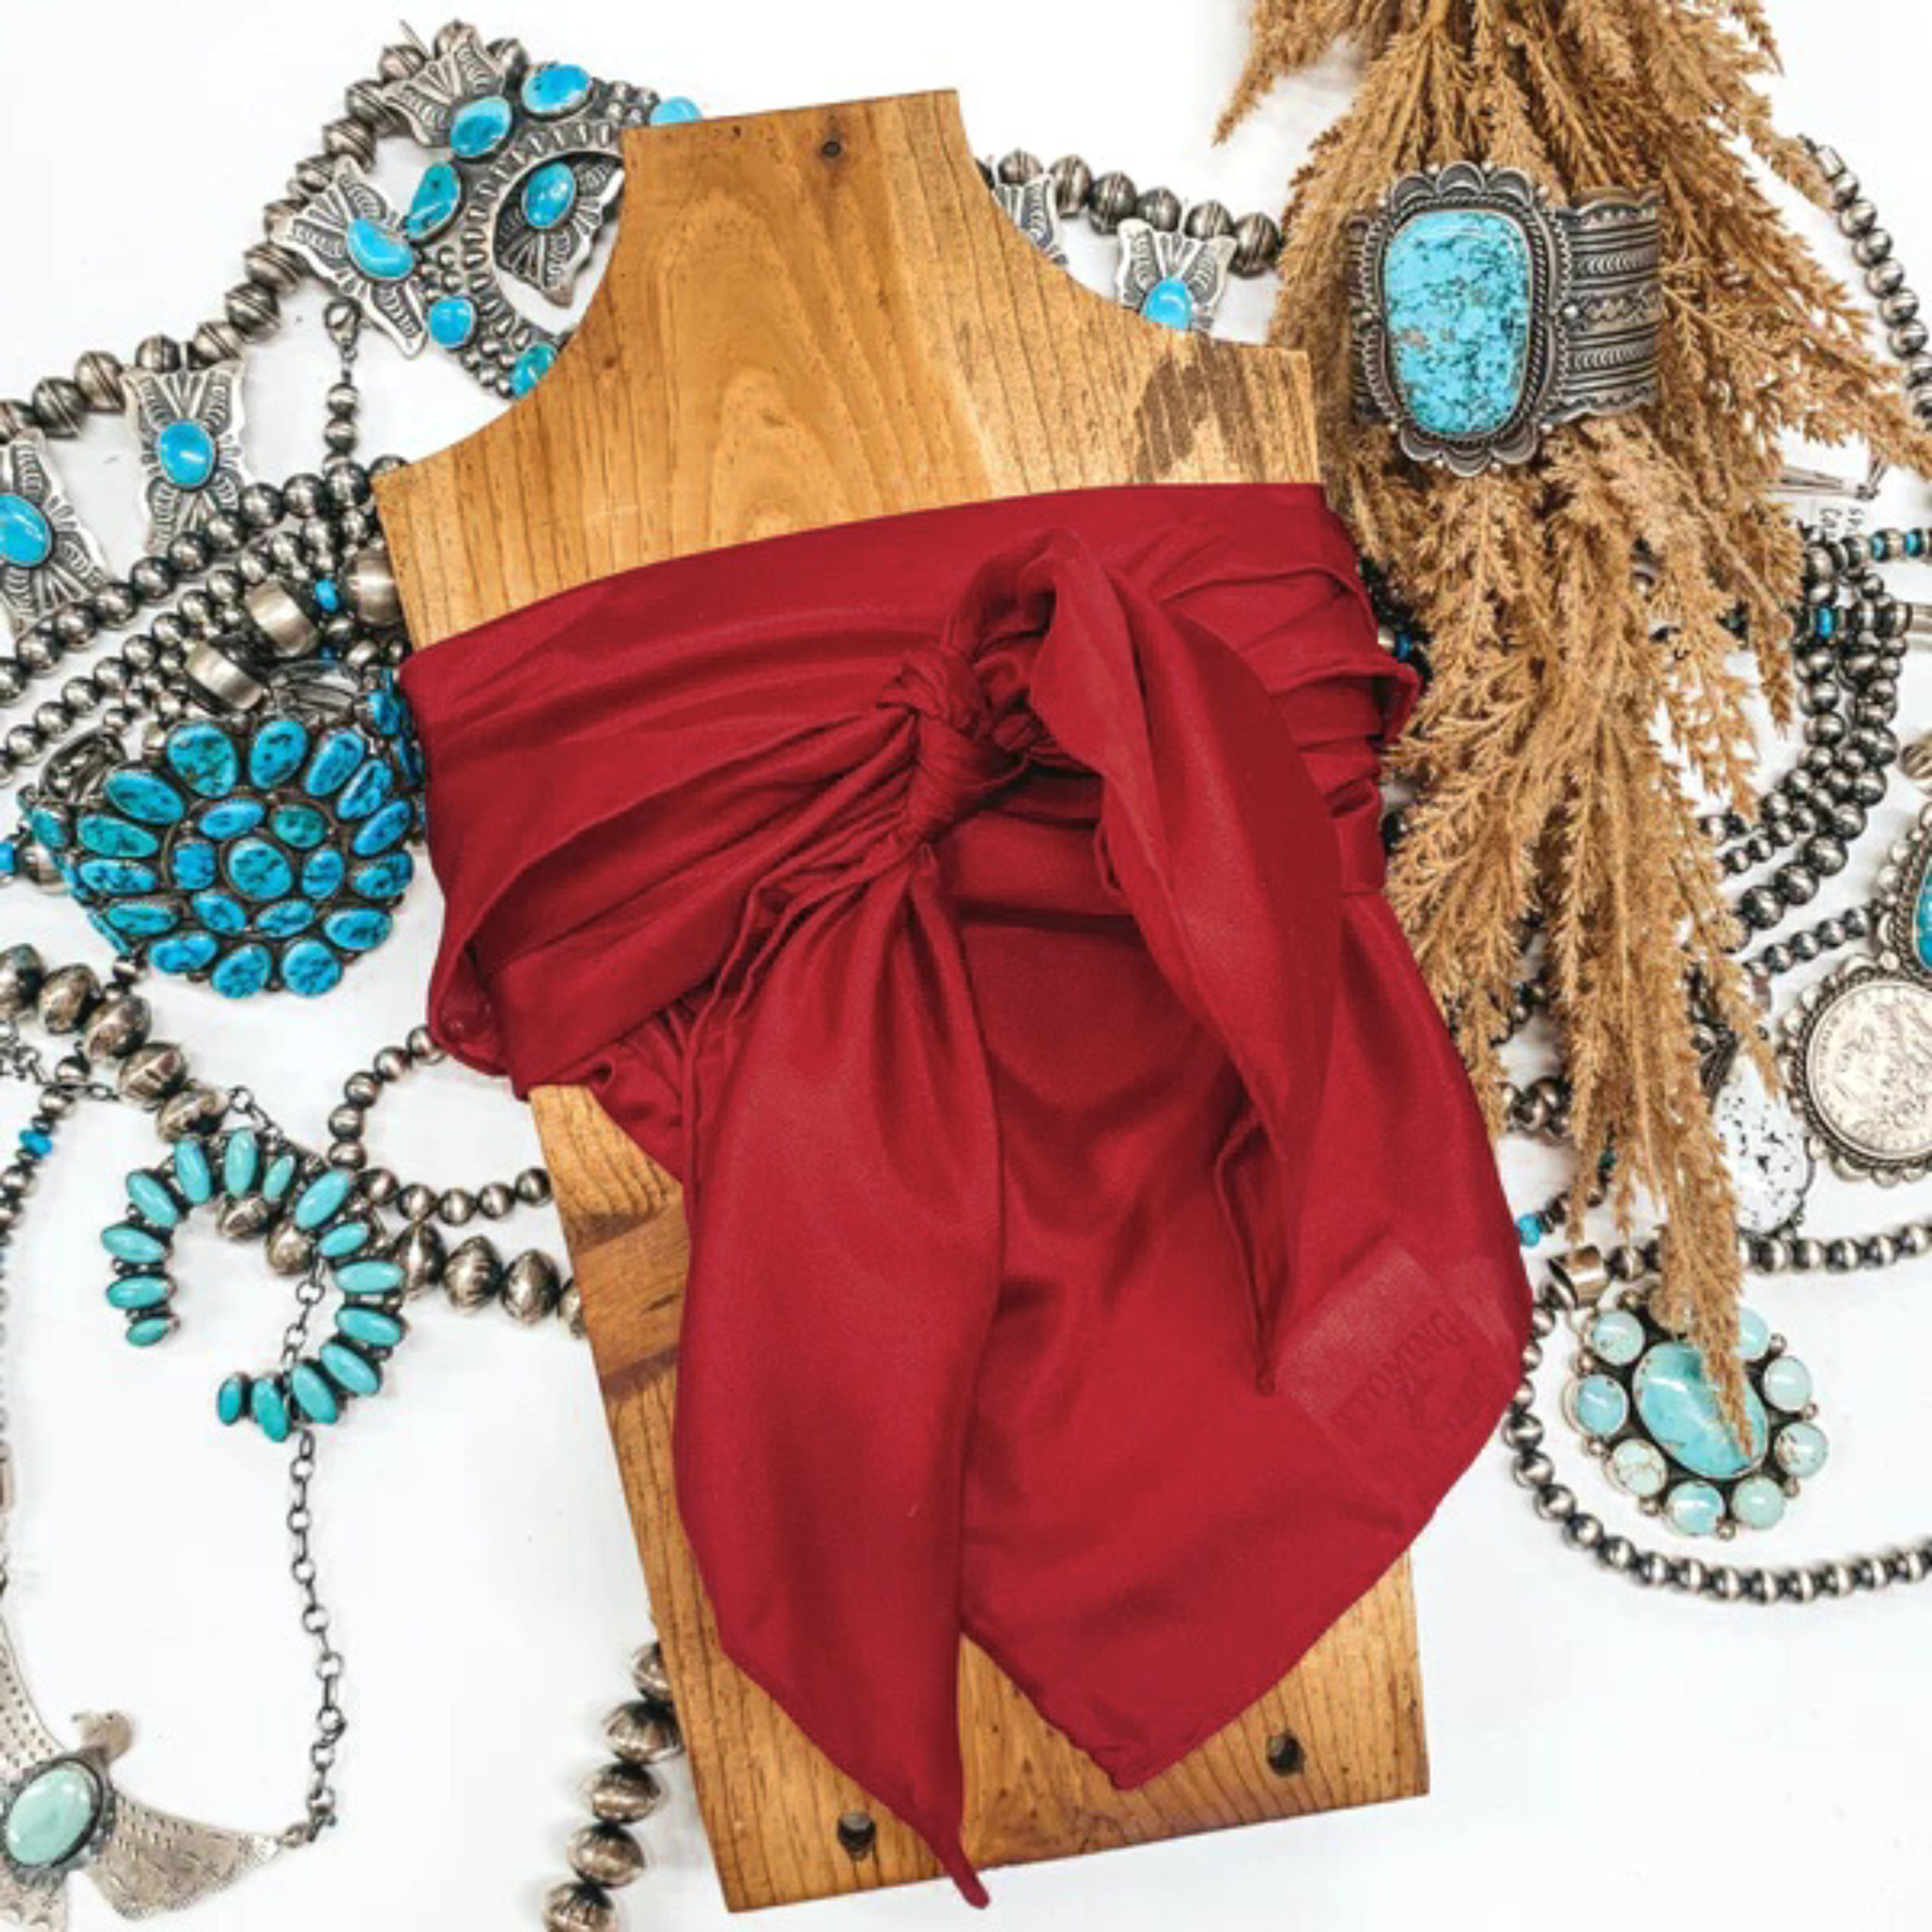 This is a deep red silk wild rag, this wild rag is pictured wrapped around a brown necklace board. This wild rag is pictured on a white background and with silver and turquoise Navajo jewelry behind it as decoration.